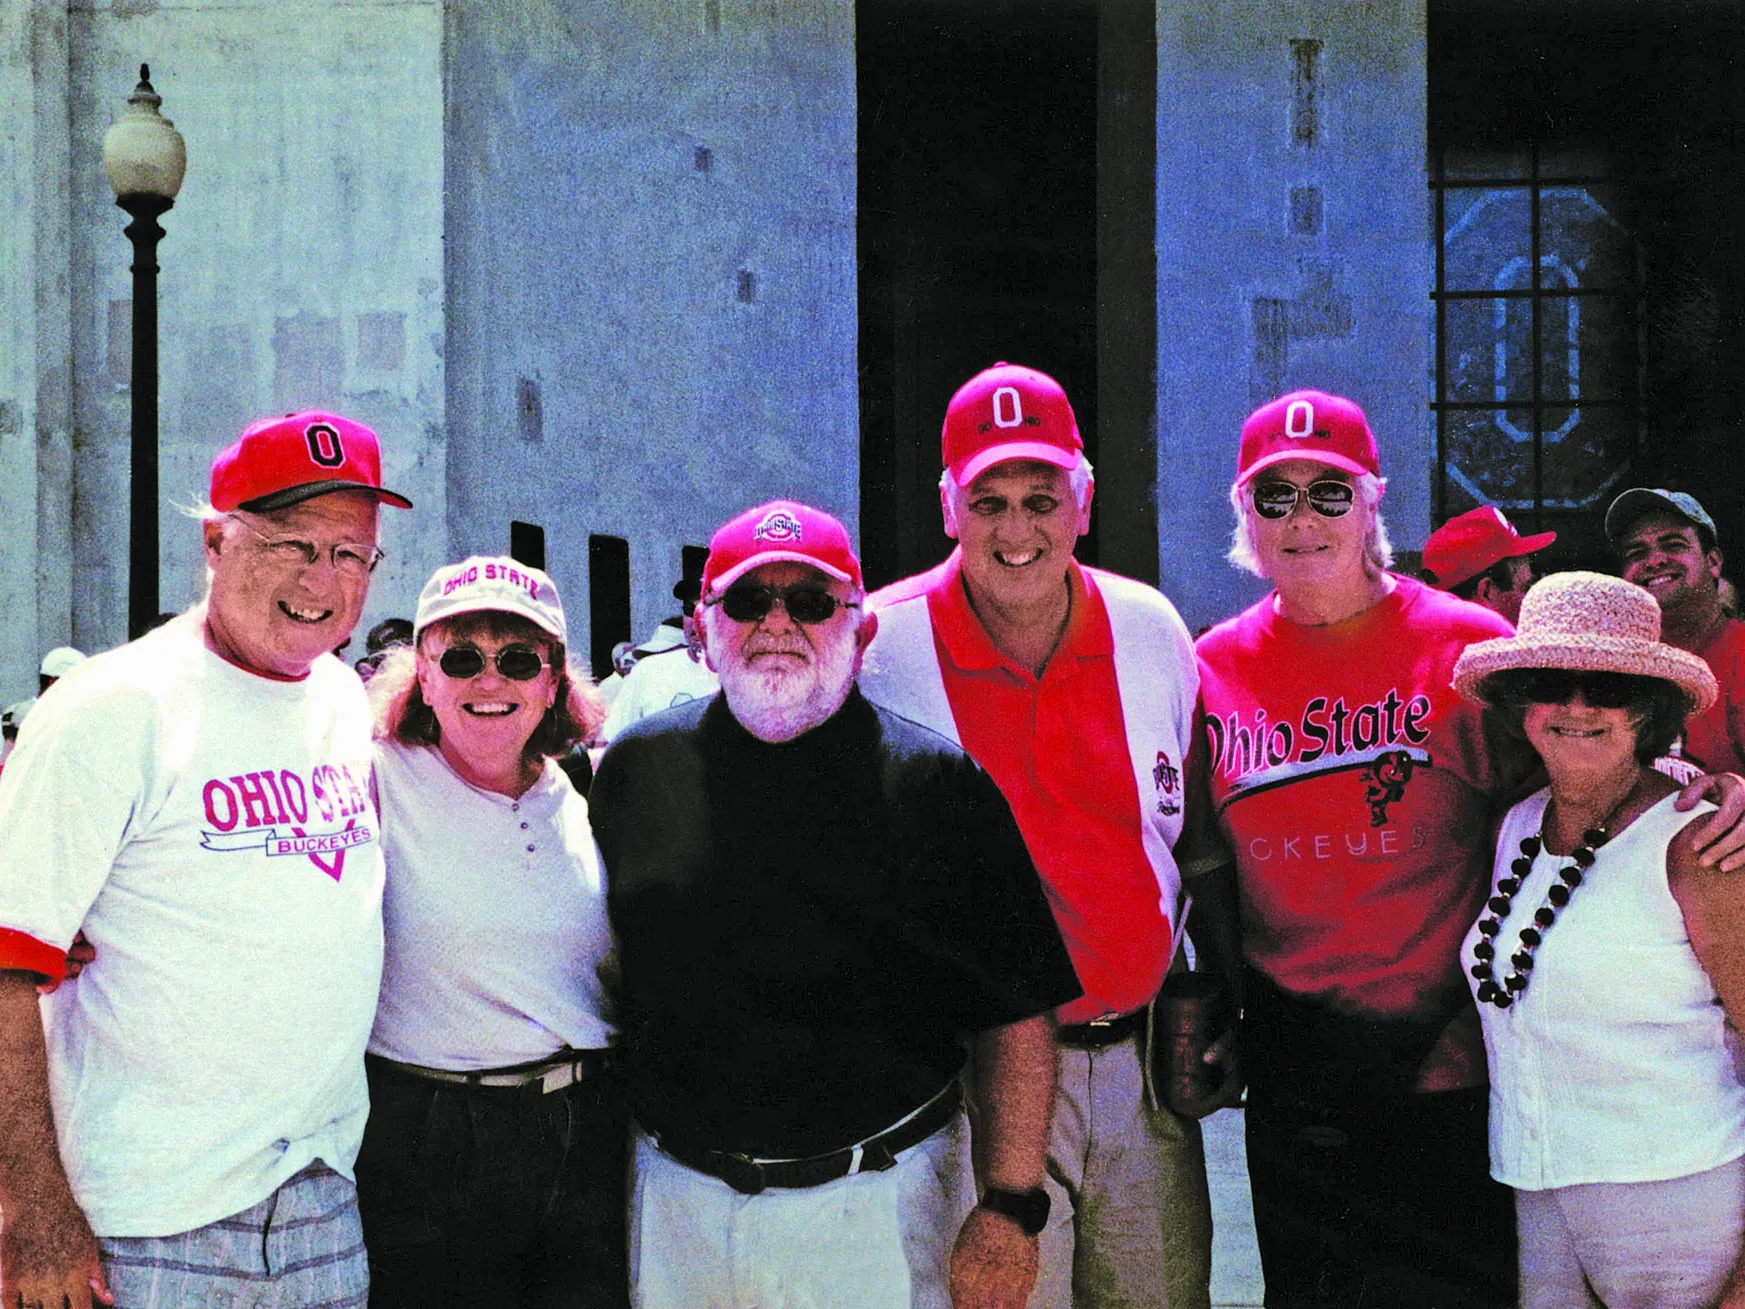 Three couples pose in front of the entrance to Ohio Stadium. They are all white, middle-aged people wearing Ohio State gear and baseball caps (though one lady has on a brimmed sunhat) who stand smiling with their arms around the shoulders of the people next to them.